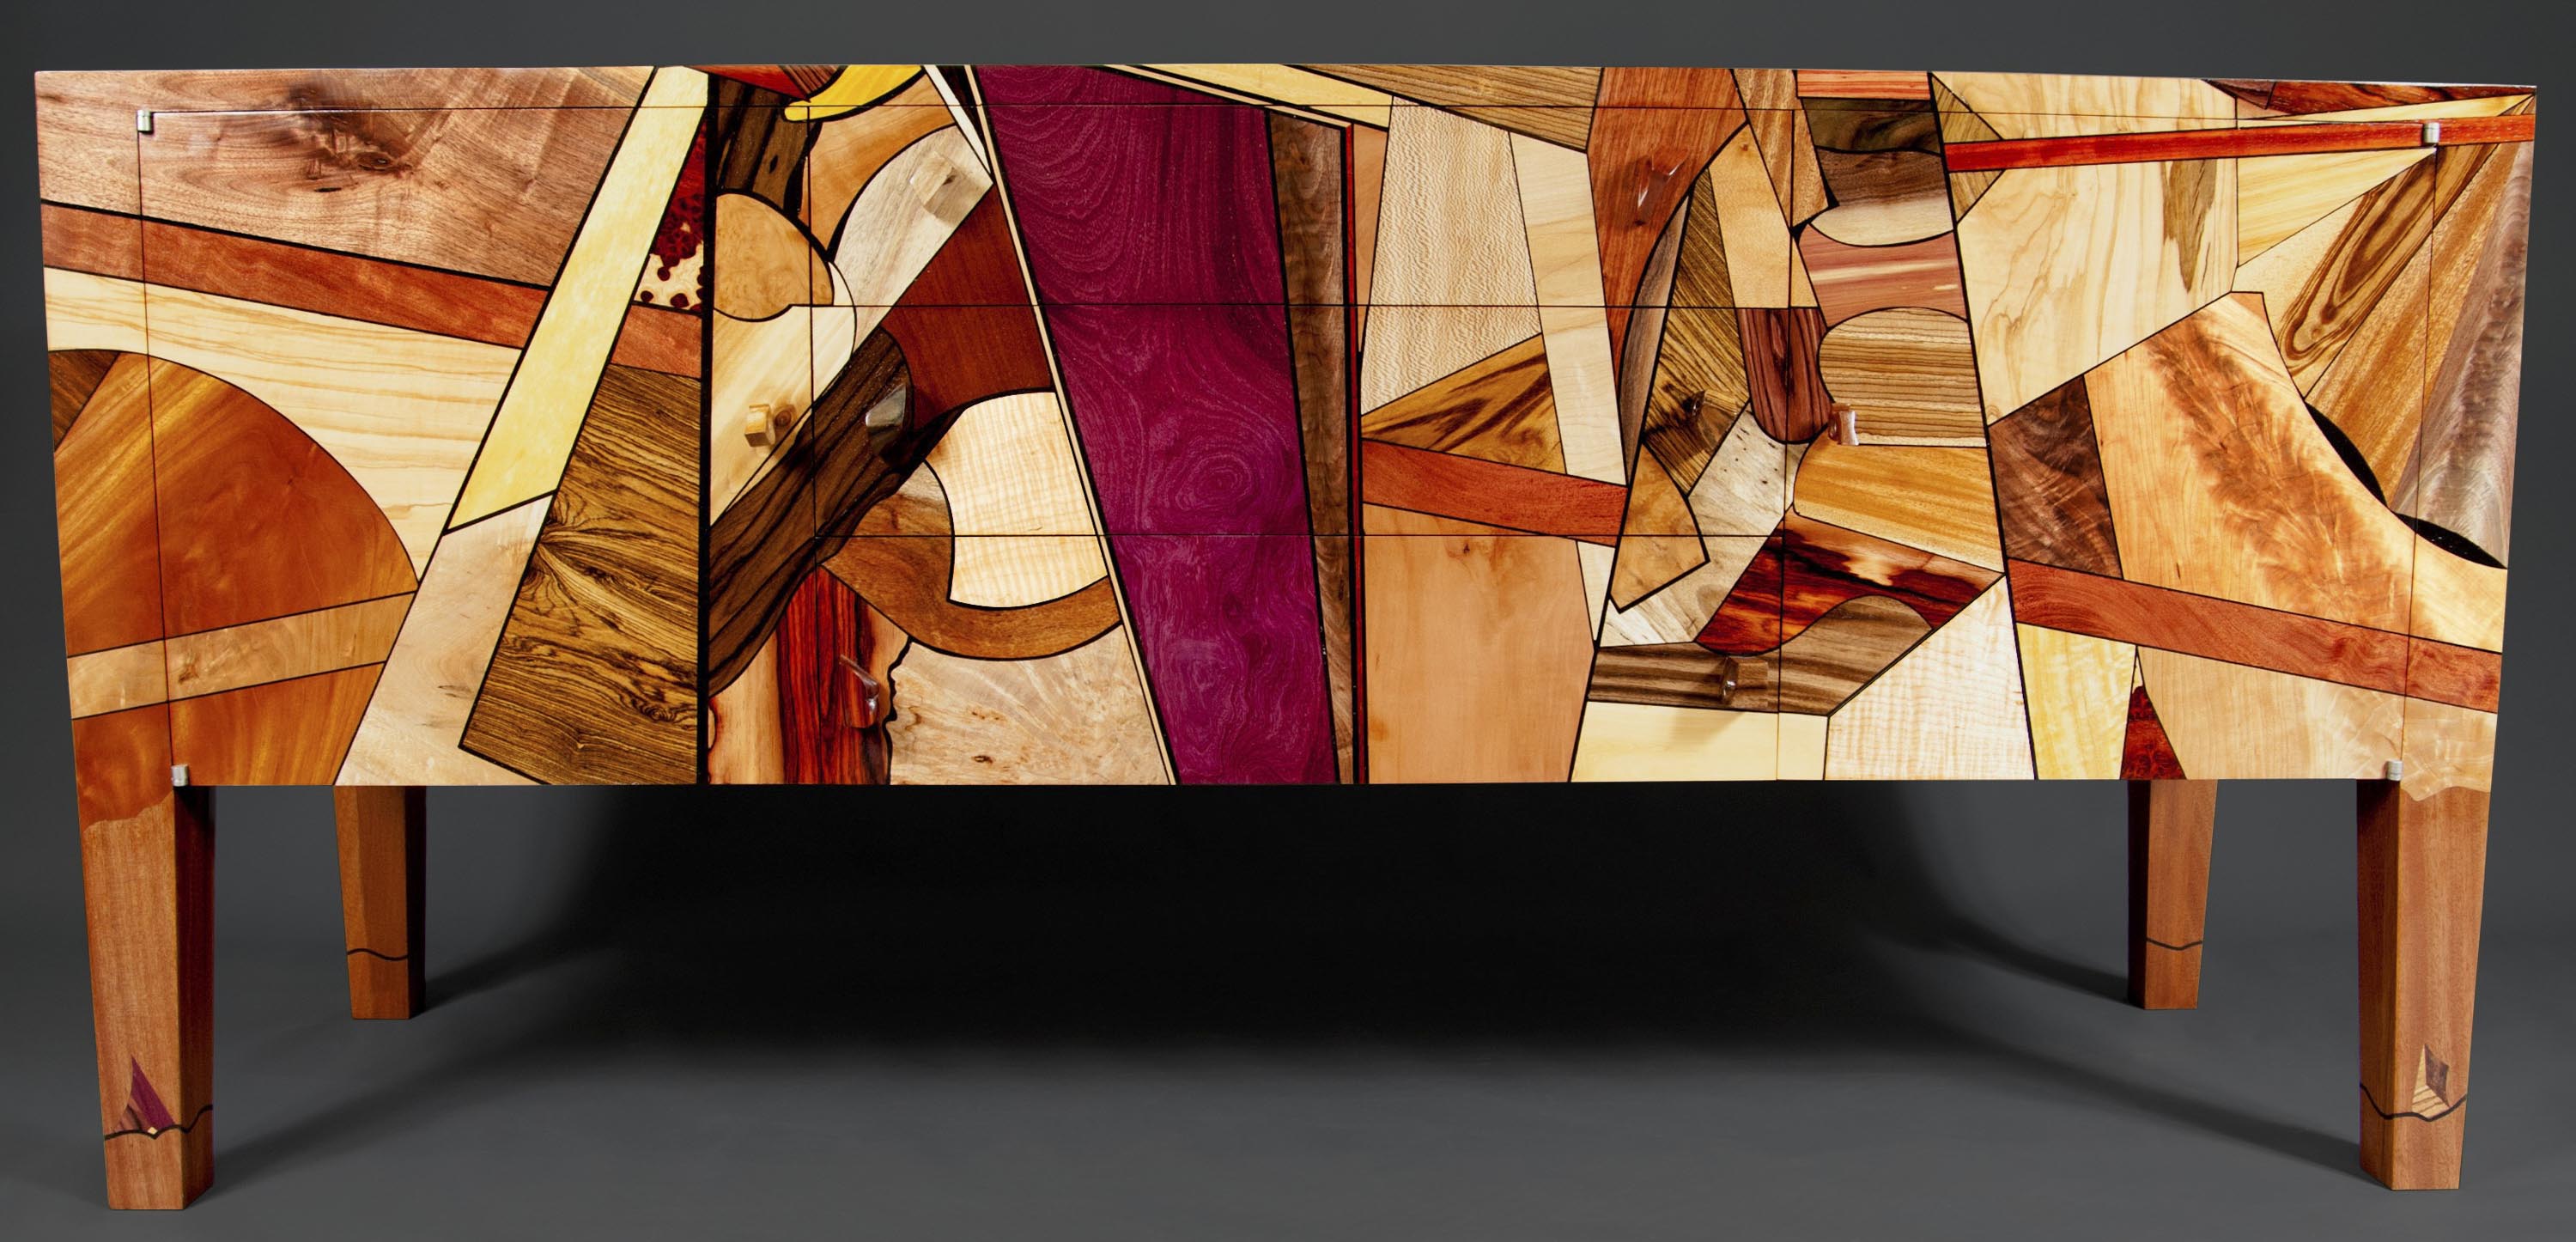 The roundup of talent at the 25th annual Western Design Conference Exhibit + Sale in Jackson Hole this September includes Mondrian-inspired marquetry by MosArt.